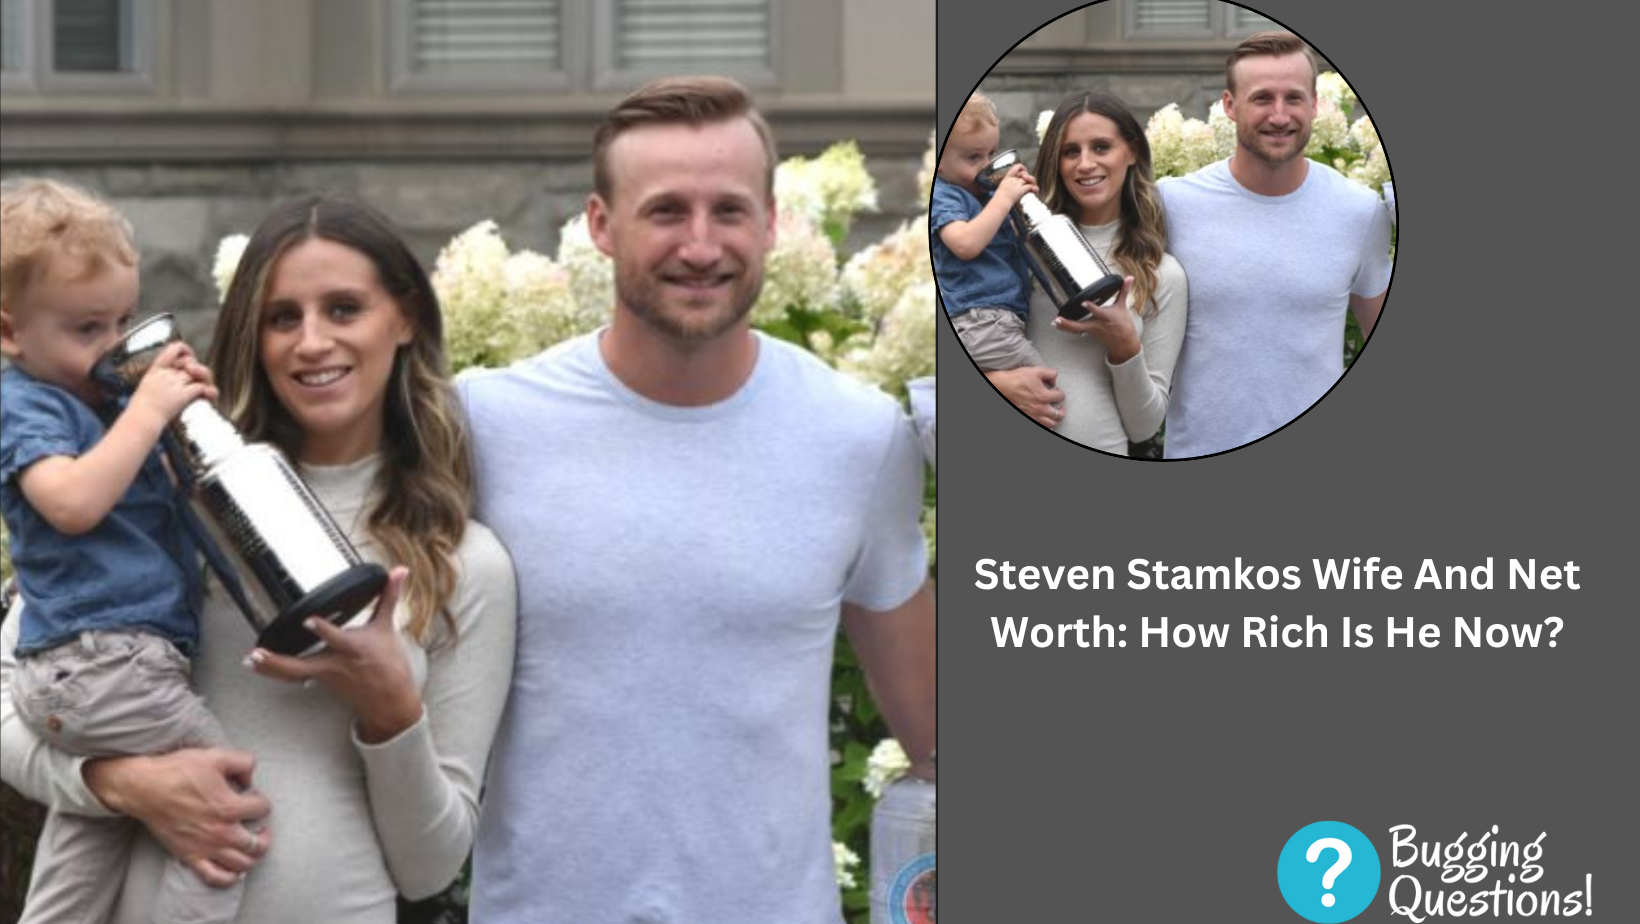 Steven Stamkos Wife And Net Worth